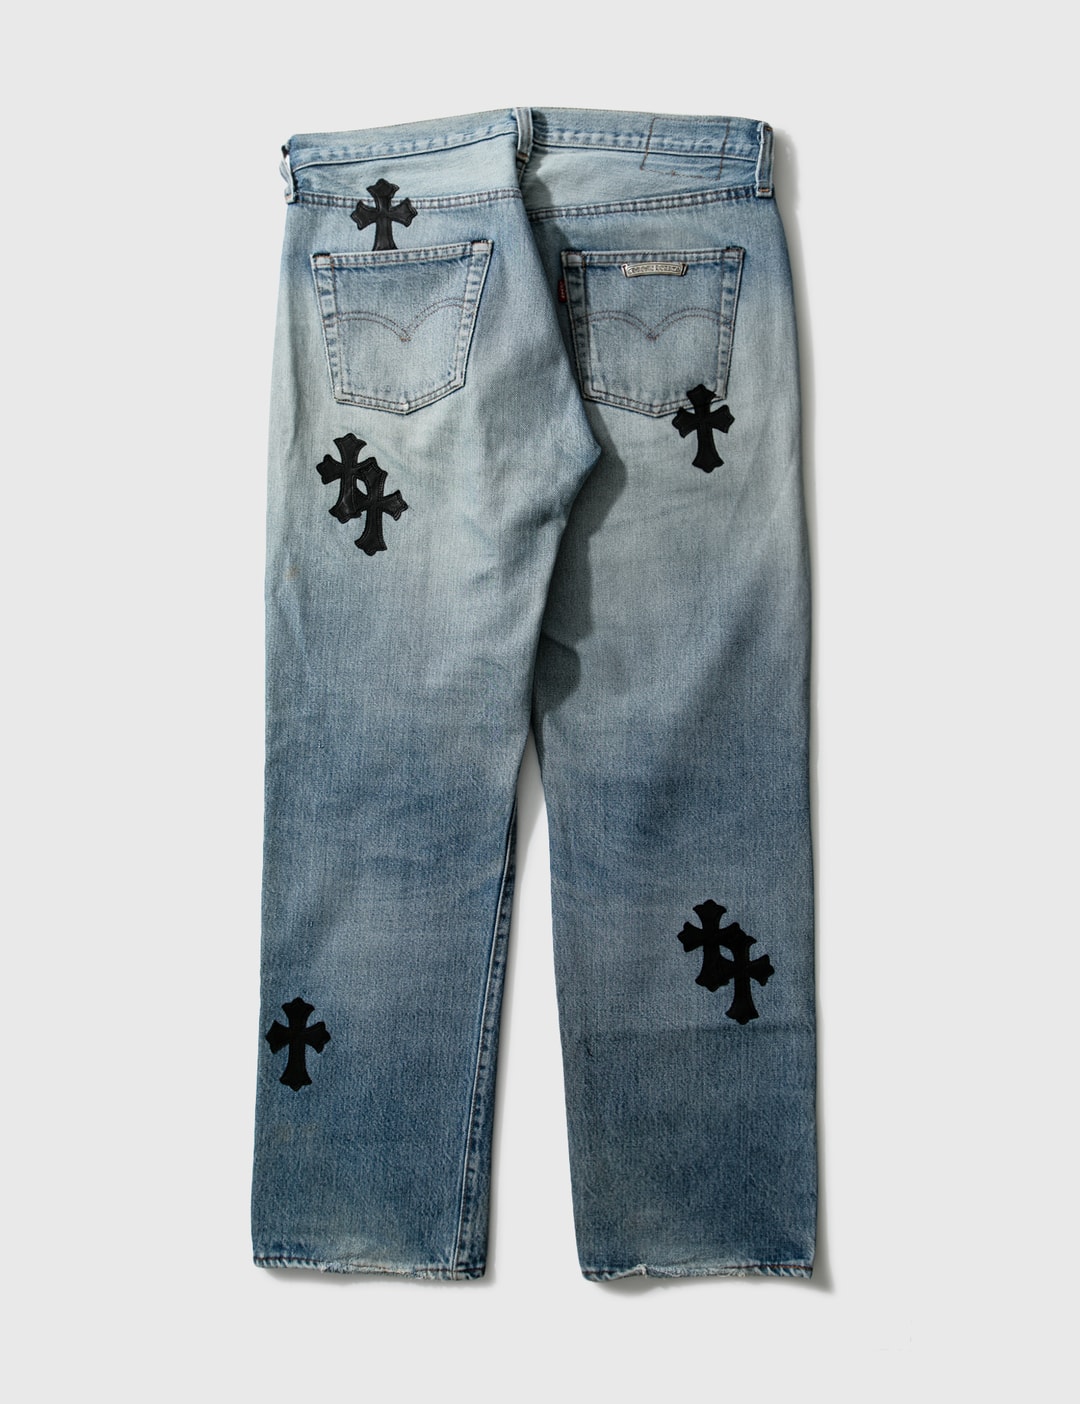 Levi's - Chrome Hearts X Levis Jeans | HBX - Globally Curated Fashion and  Lifestyle by Hypebeast